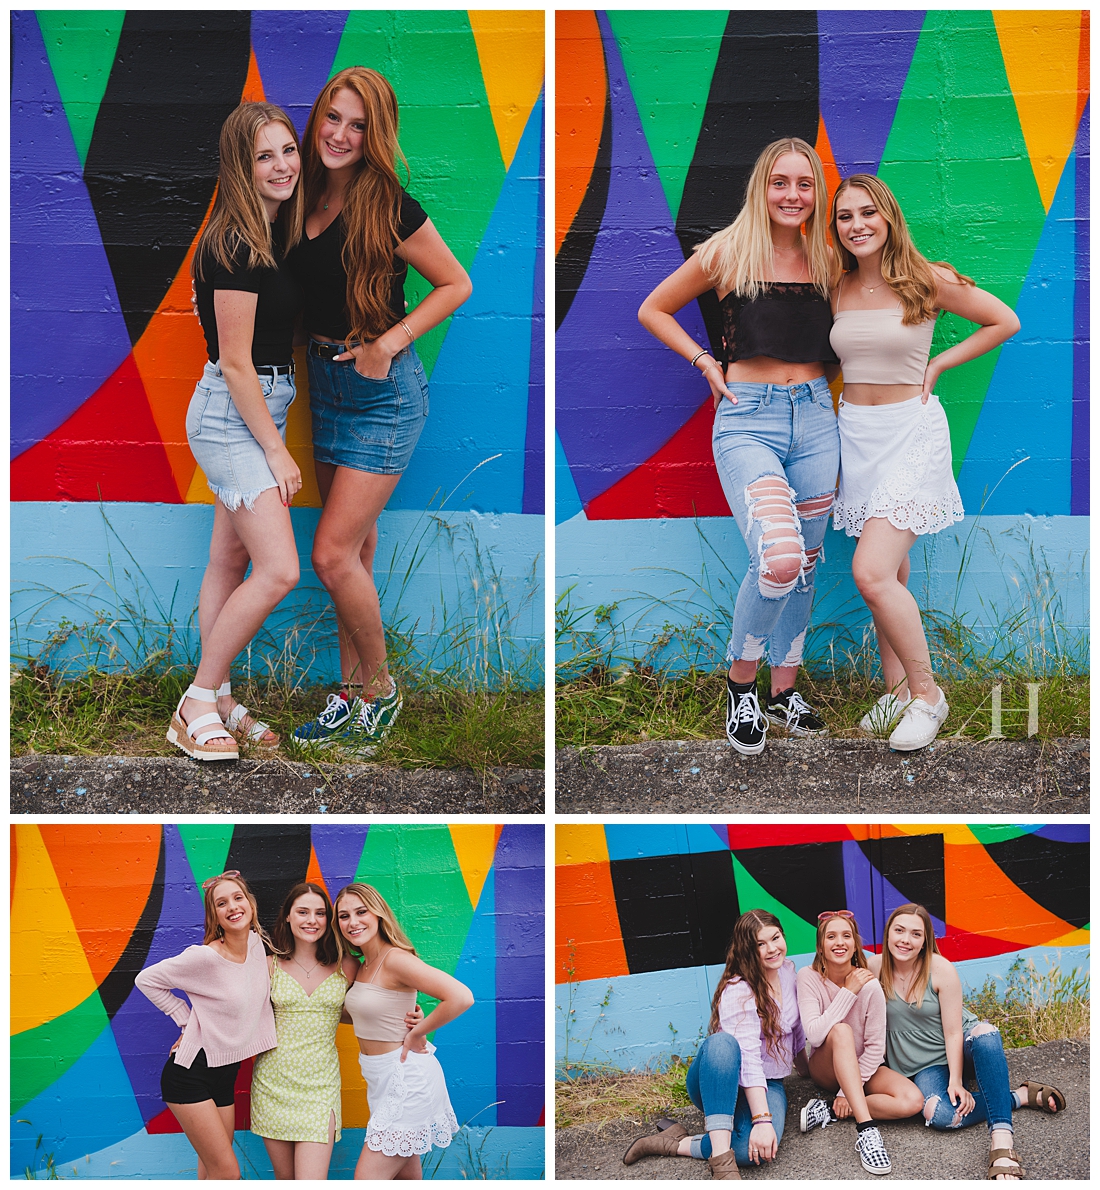 Tacoma Senior Photographer Amanda Howse | Portraits of the high school senior model team in front of vibrant city mural in Tacoma